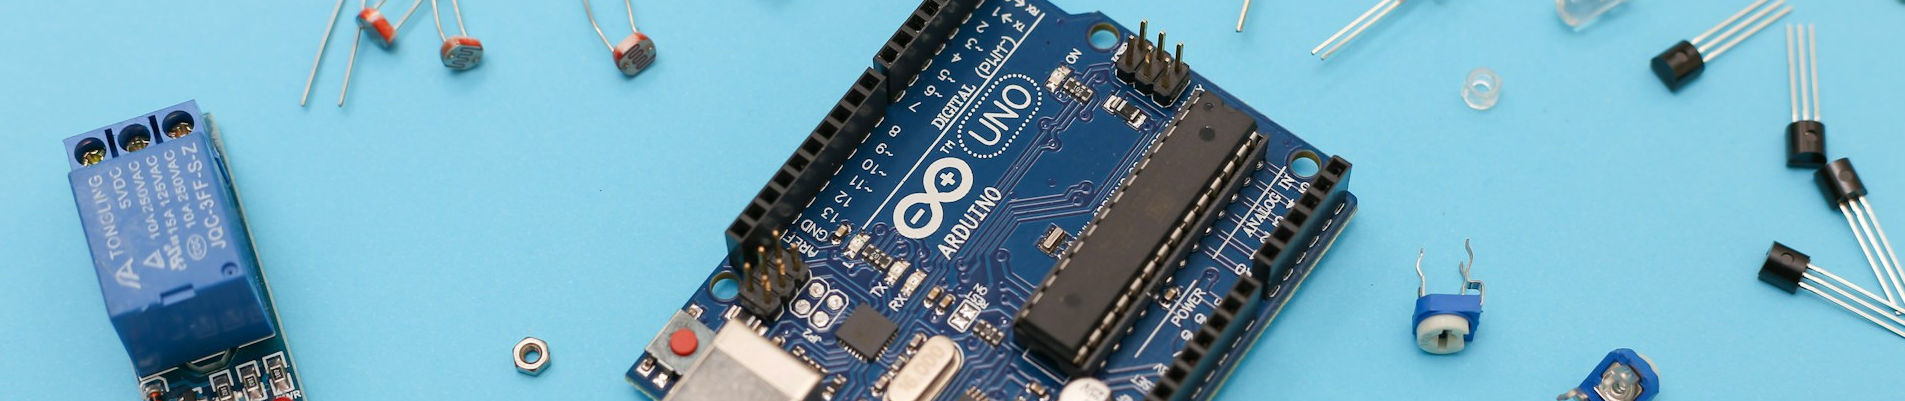 An image of an arduino device and other electronic components